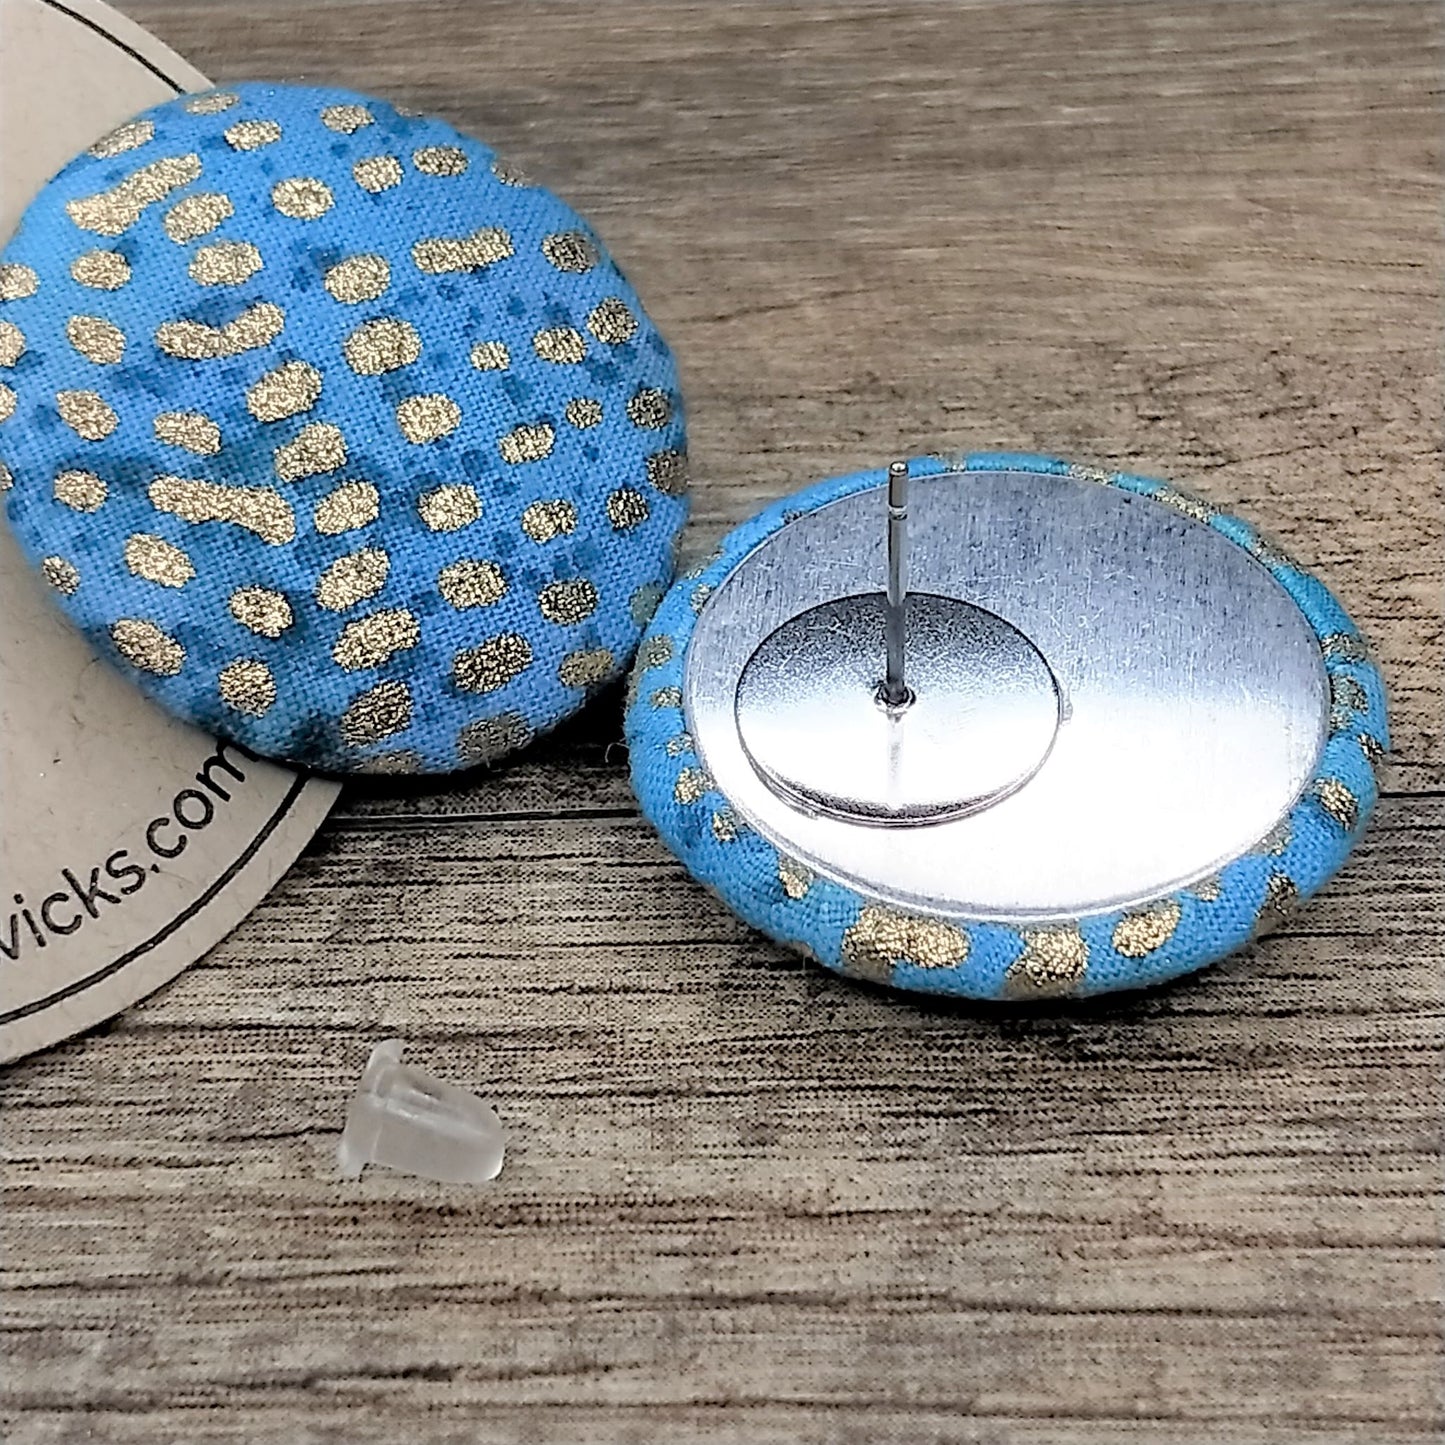 Wildears Fabric Covered Button Earrings Gold Turquoise 27mm